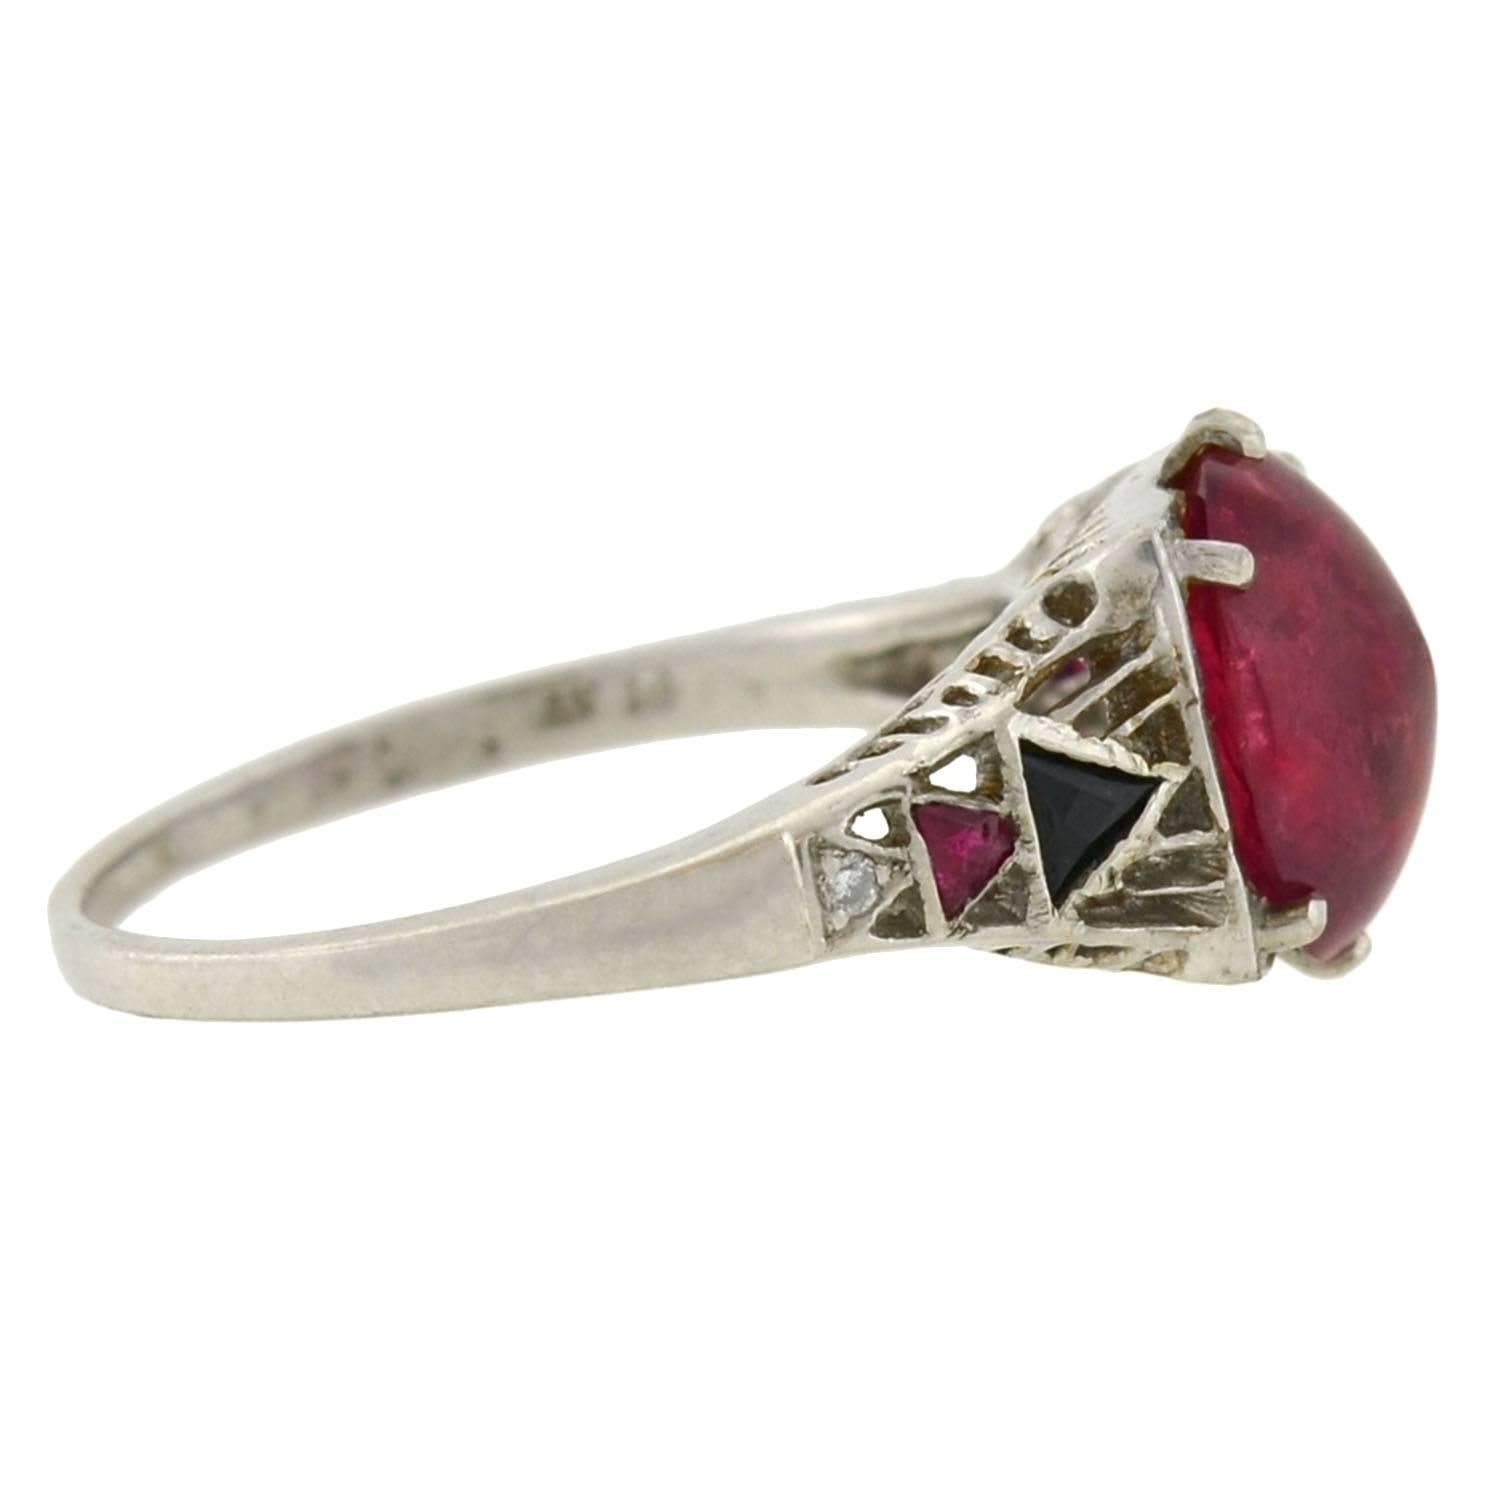 An unusual gemstone ring from the Art Deco (ca1920s) era! Crafted in platinum, this beautiful ring frames a 3.50ct natural no-heat Tanzanian ruby at the center of a filigree mounting. The gorgeous ruby is polished into a smooth oval shape,